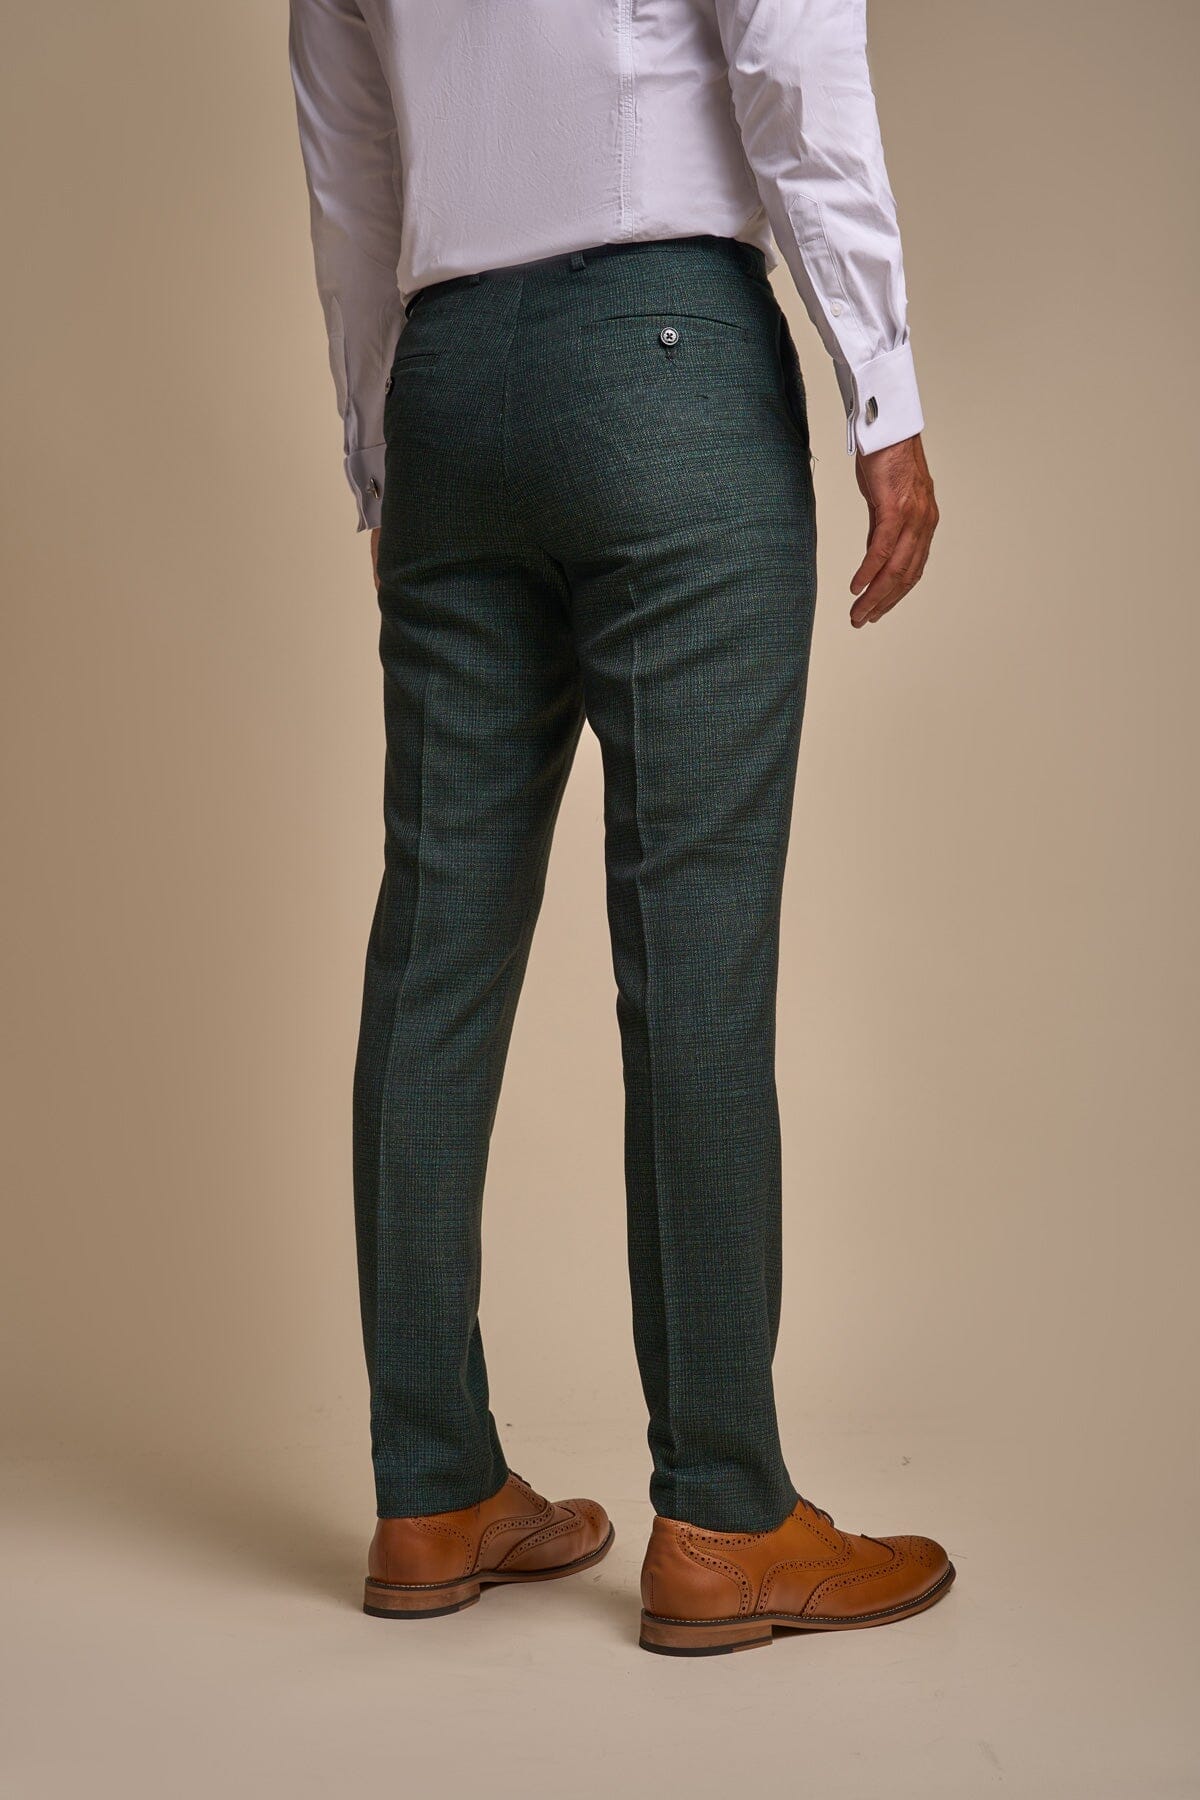 Caridi Olive Tweed Trousers - Trousers - 